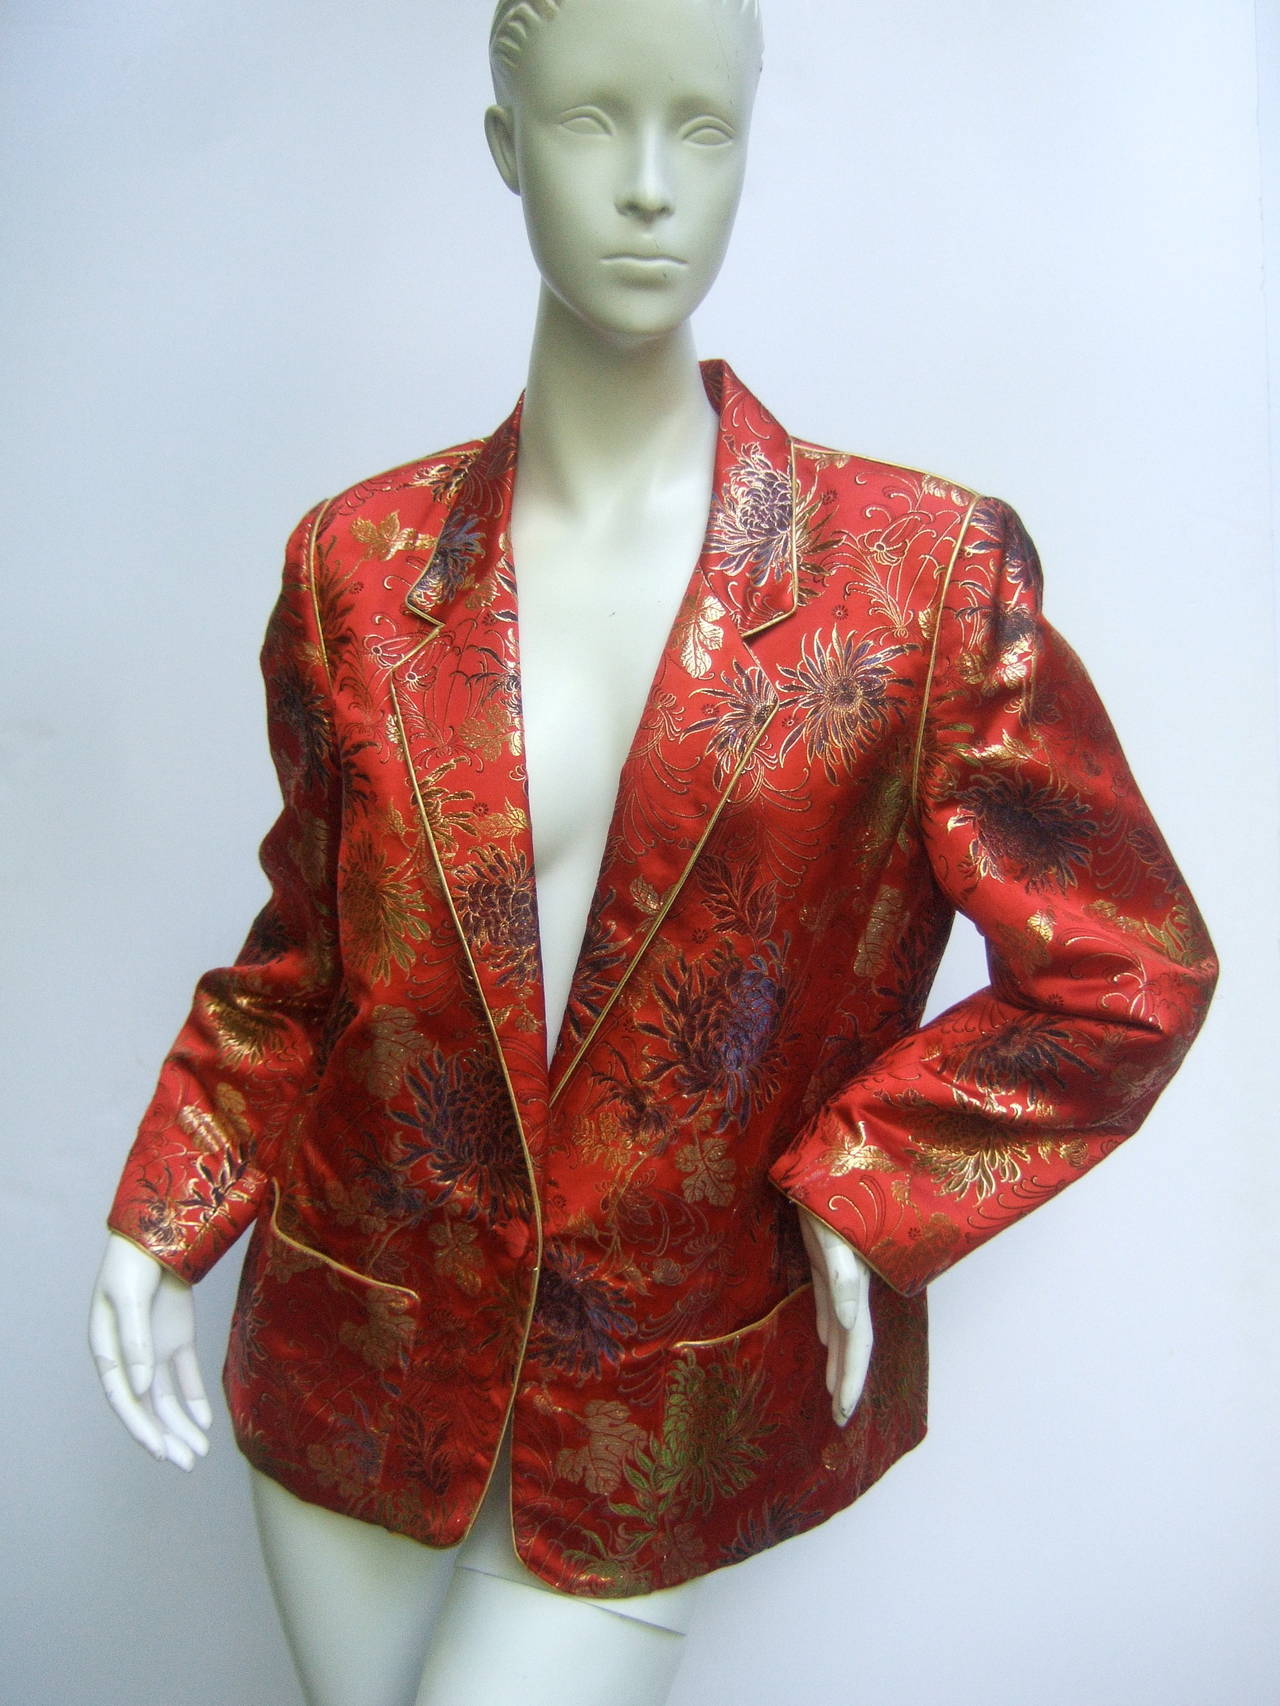 Exotic scarlet chinoiserie brocade jacket c 1980s
The luxurious vintage jacket is designed with luminous
floral brocade fabric with gold metallic piping trim that
frames the lapels, cuffs & pockets

The field of lush flower blooms are set